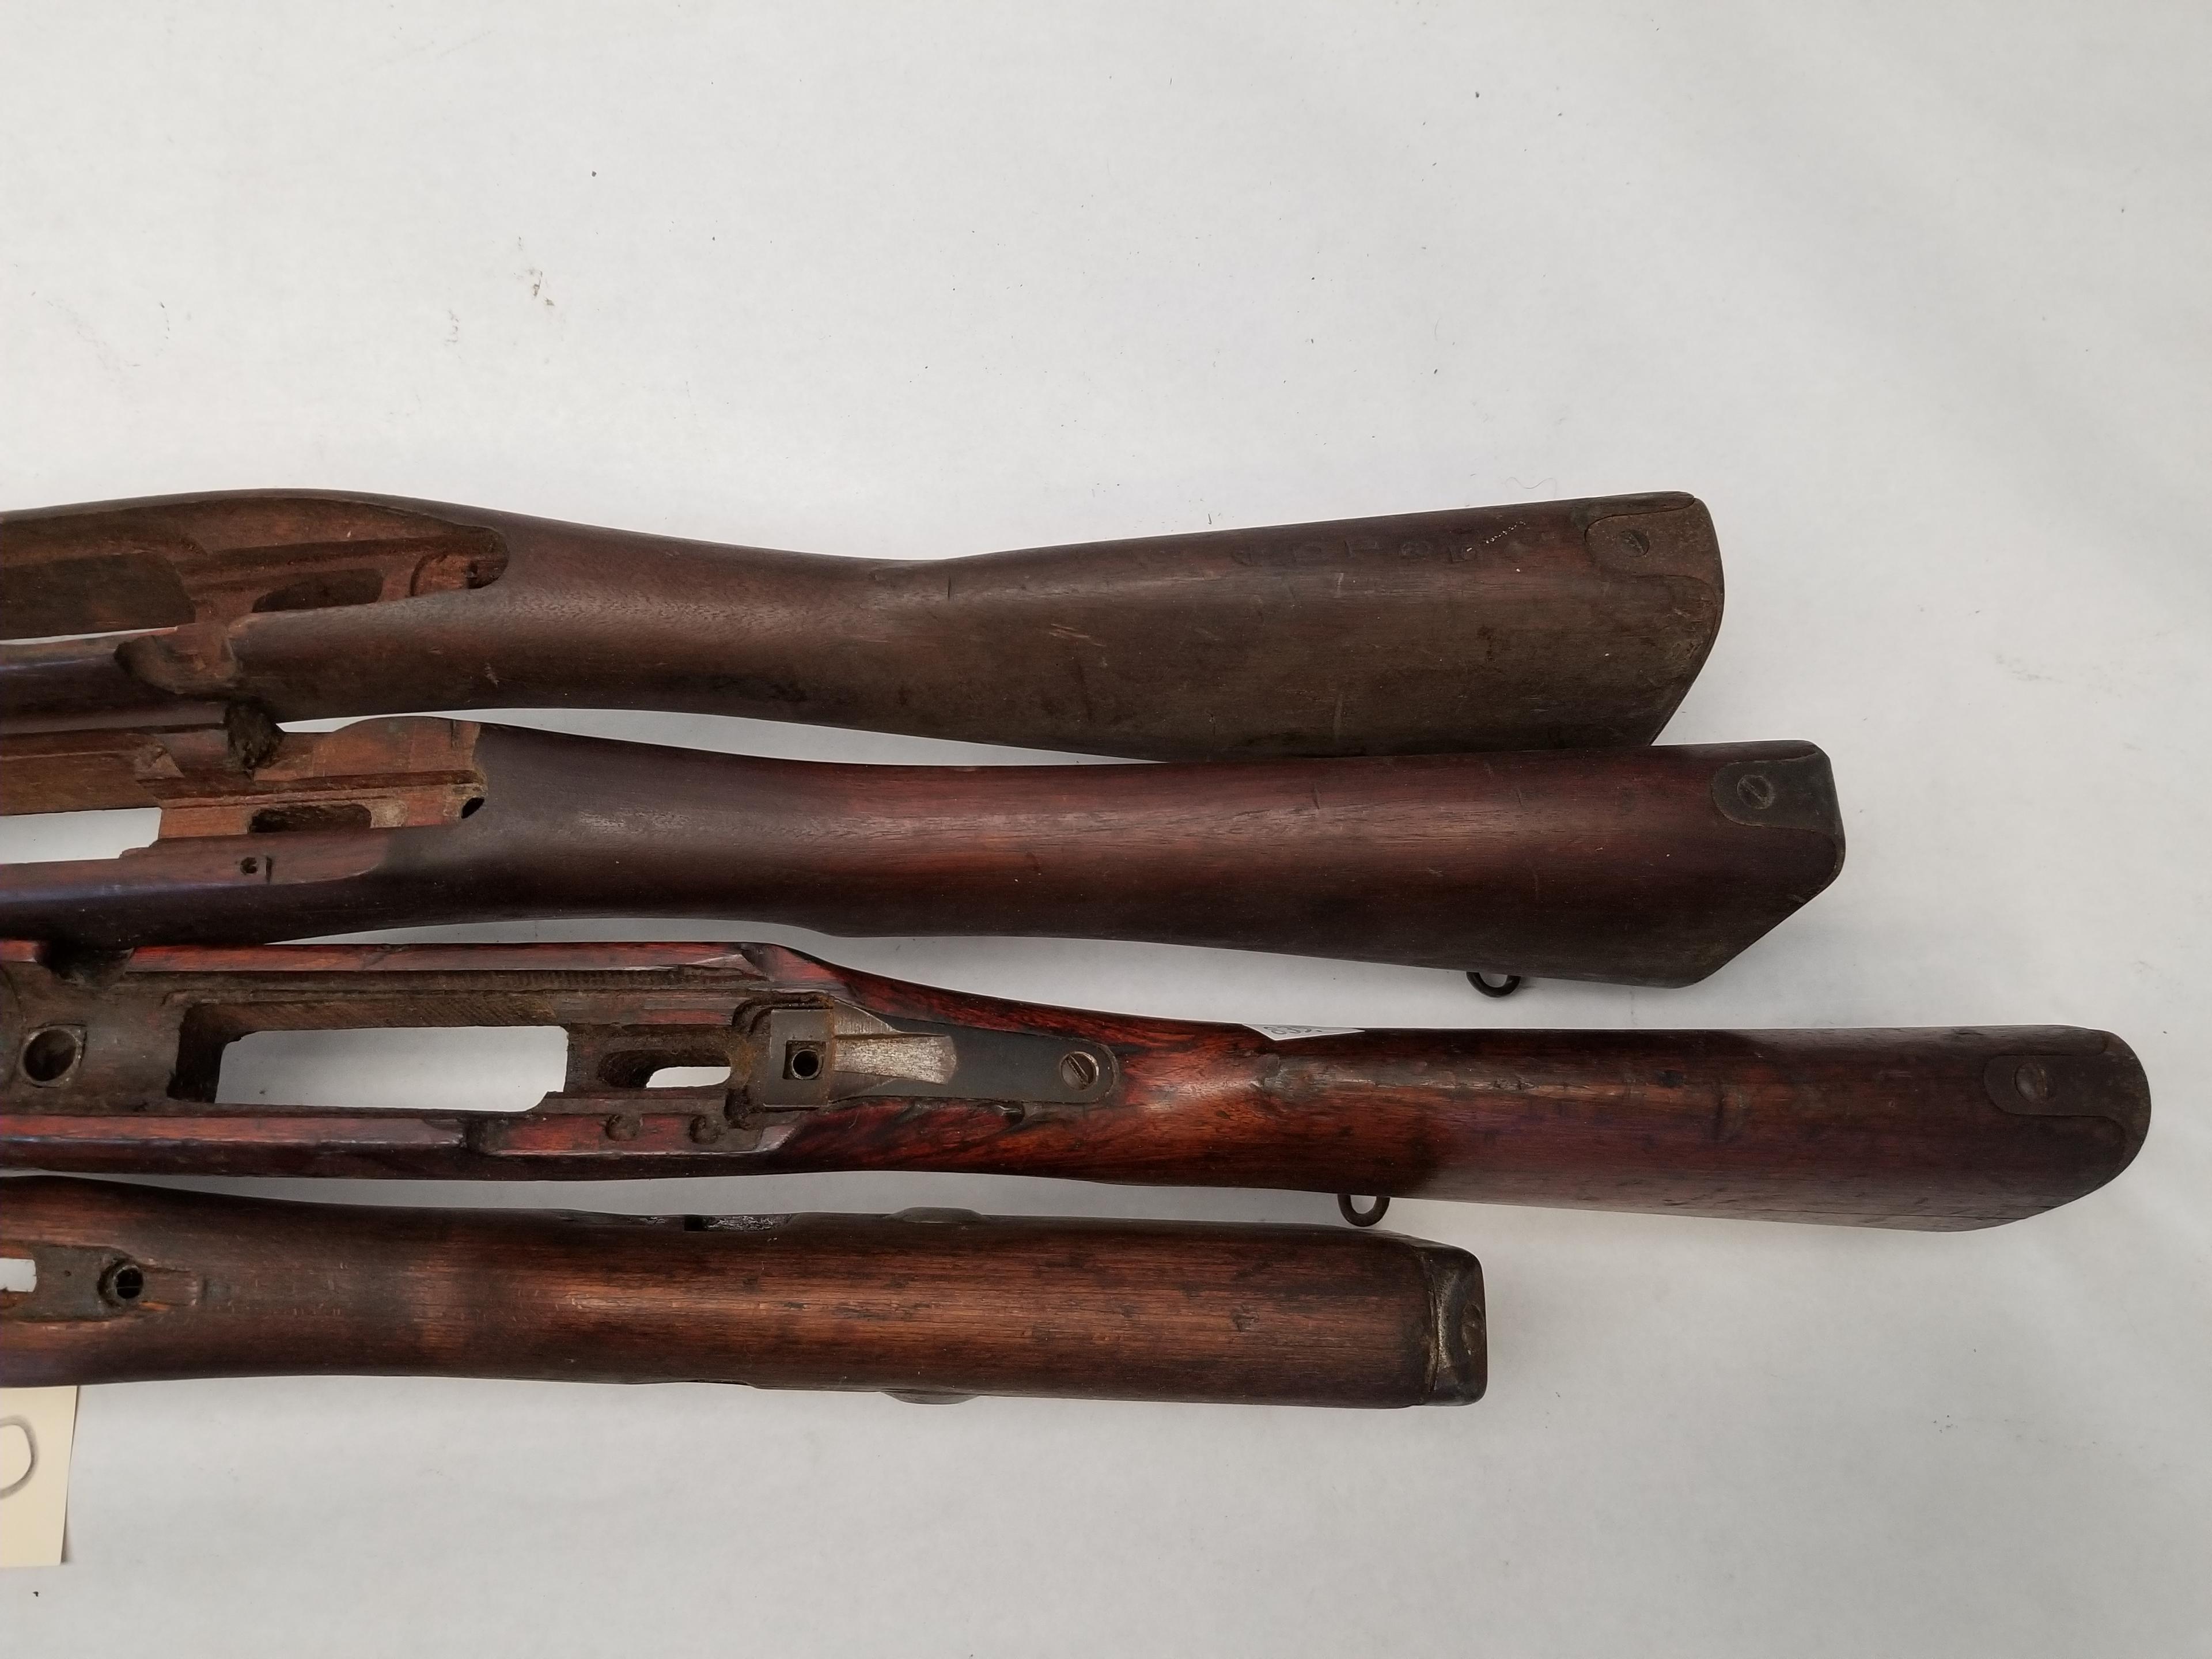 (4) Used Wooden Military Rifle Stocks